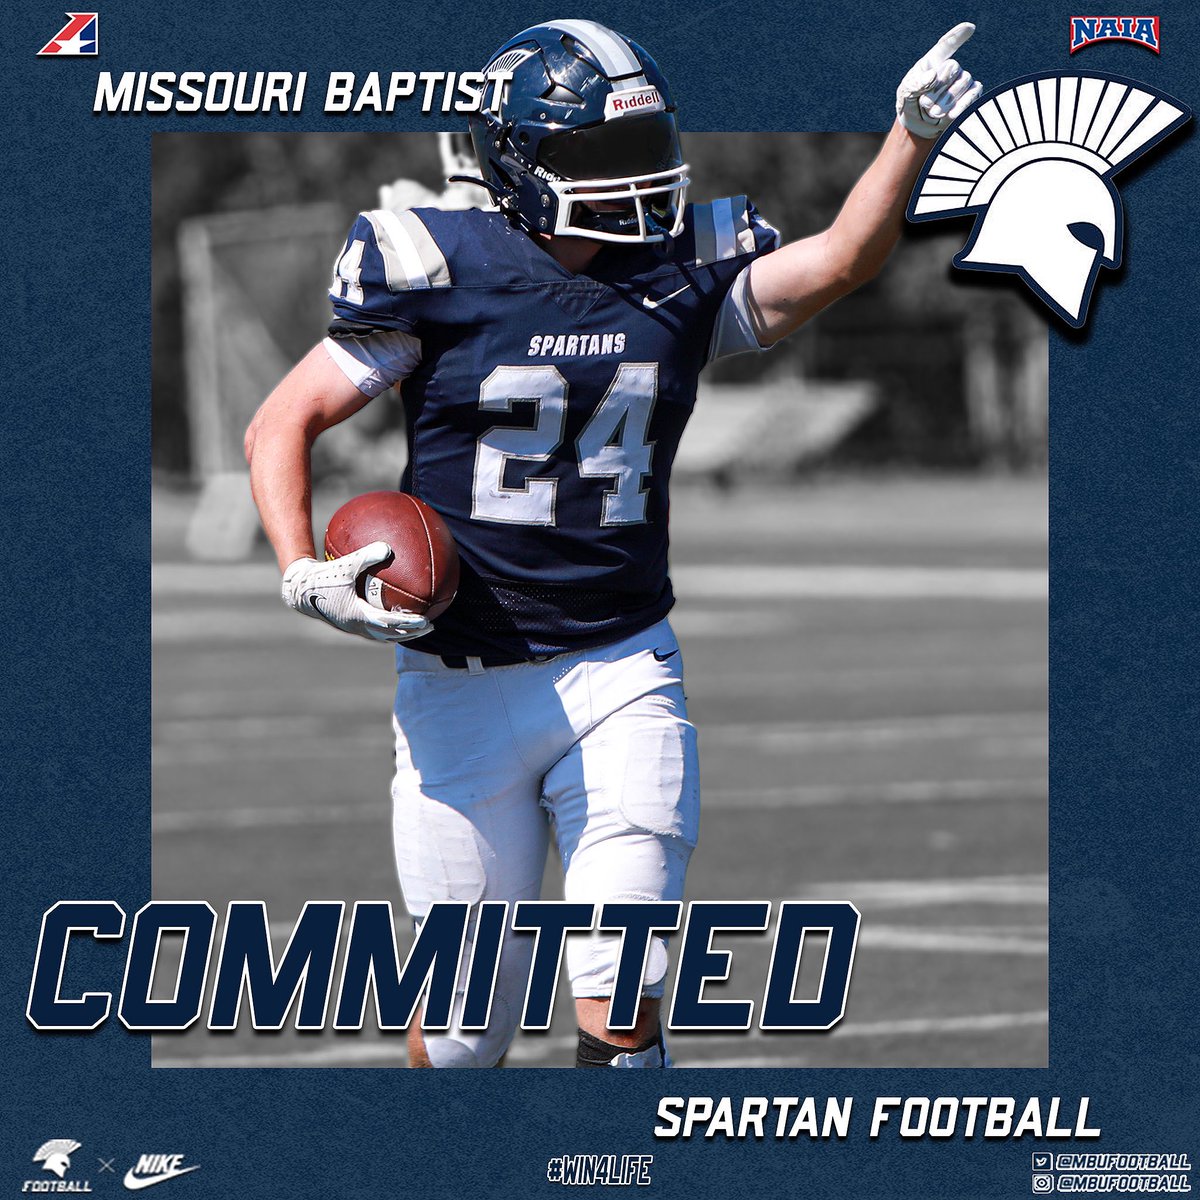 #COMMITED Thank you to Coach B @MBUCoachB for giving me the opportunity! Ready and excited to get to work! @CBCFootball @ScottPingel10 @MBUFootball @CoachZackKern1 @GSV_STL @JPRockMO @Coach_RayS @DP_HdSports @gage_twelve @BrendanThompsn